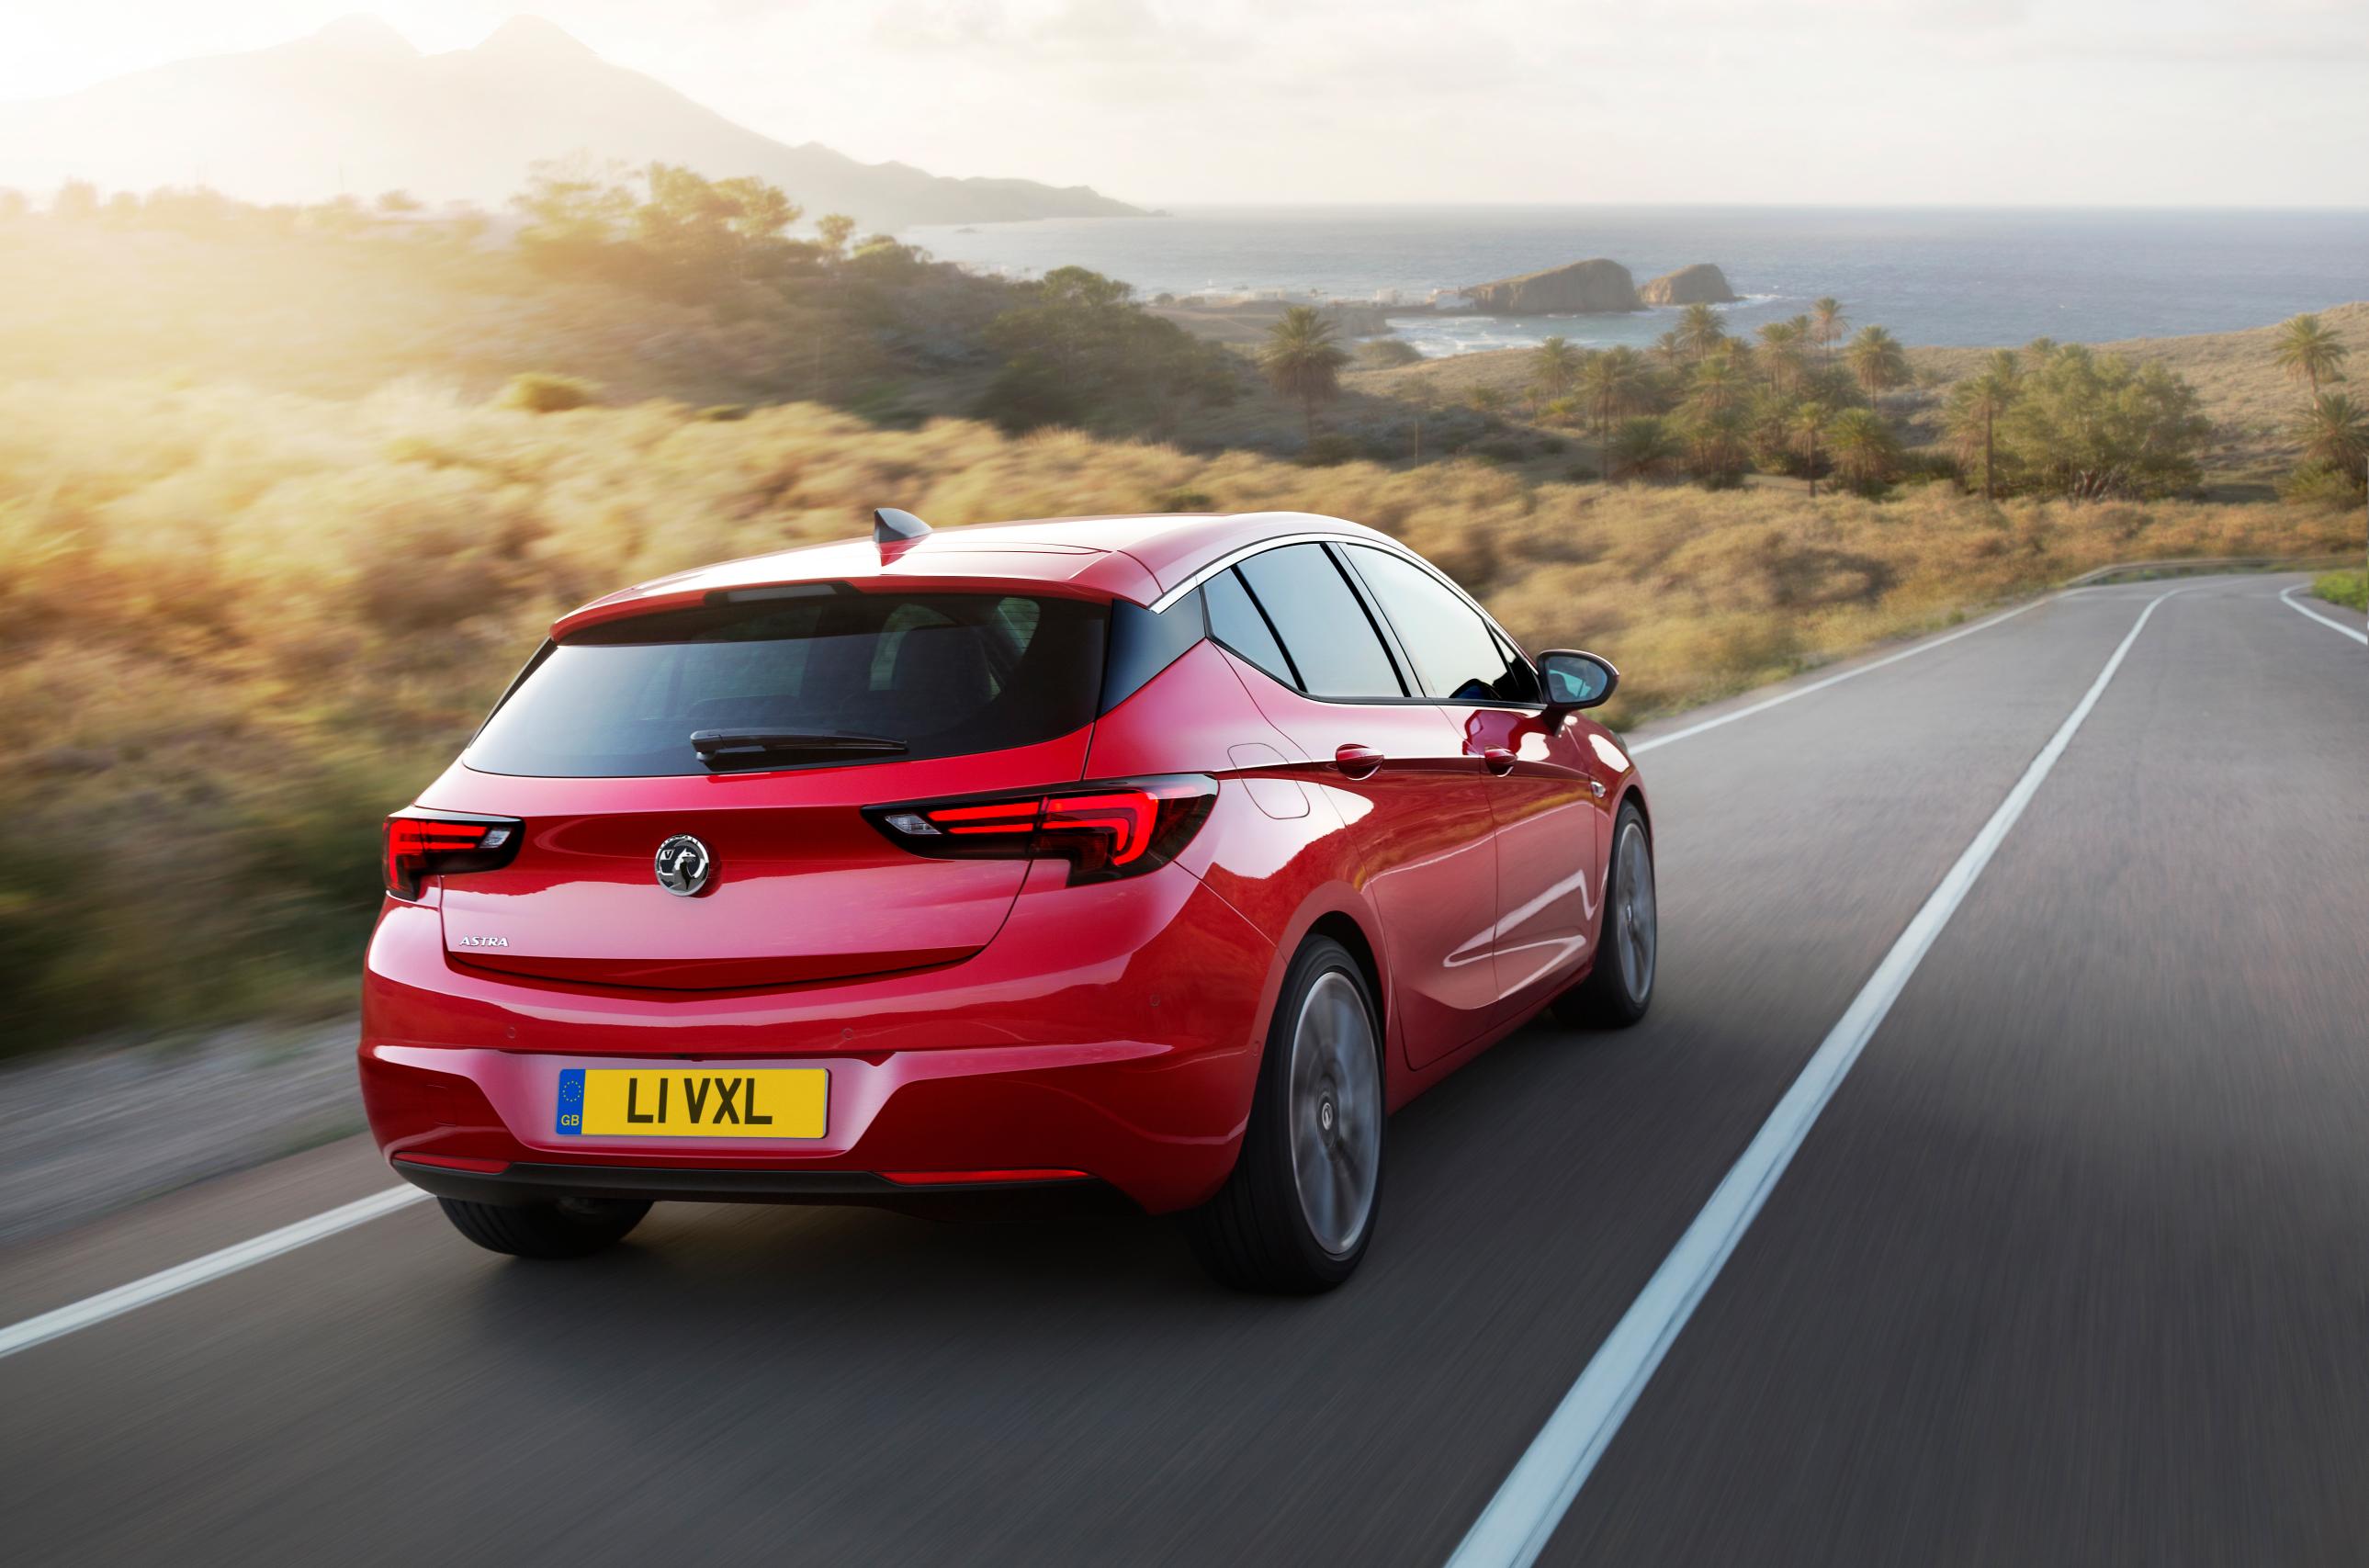 2015 Opel Astra K is Here to Stay - autoevolution